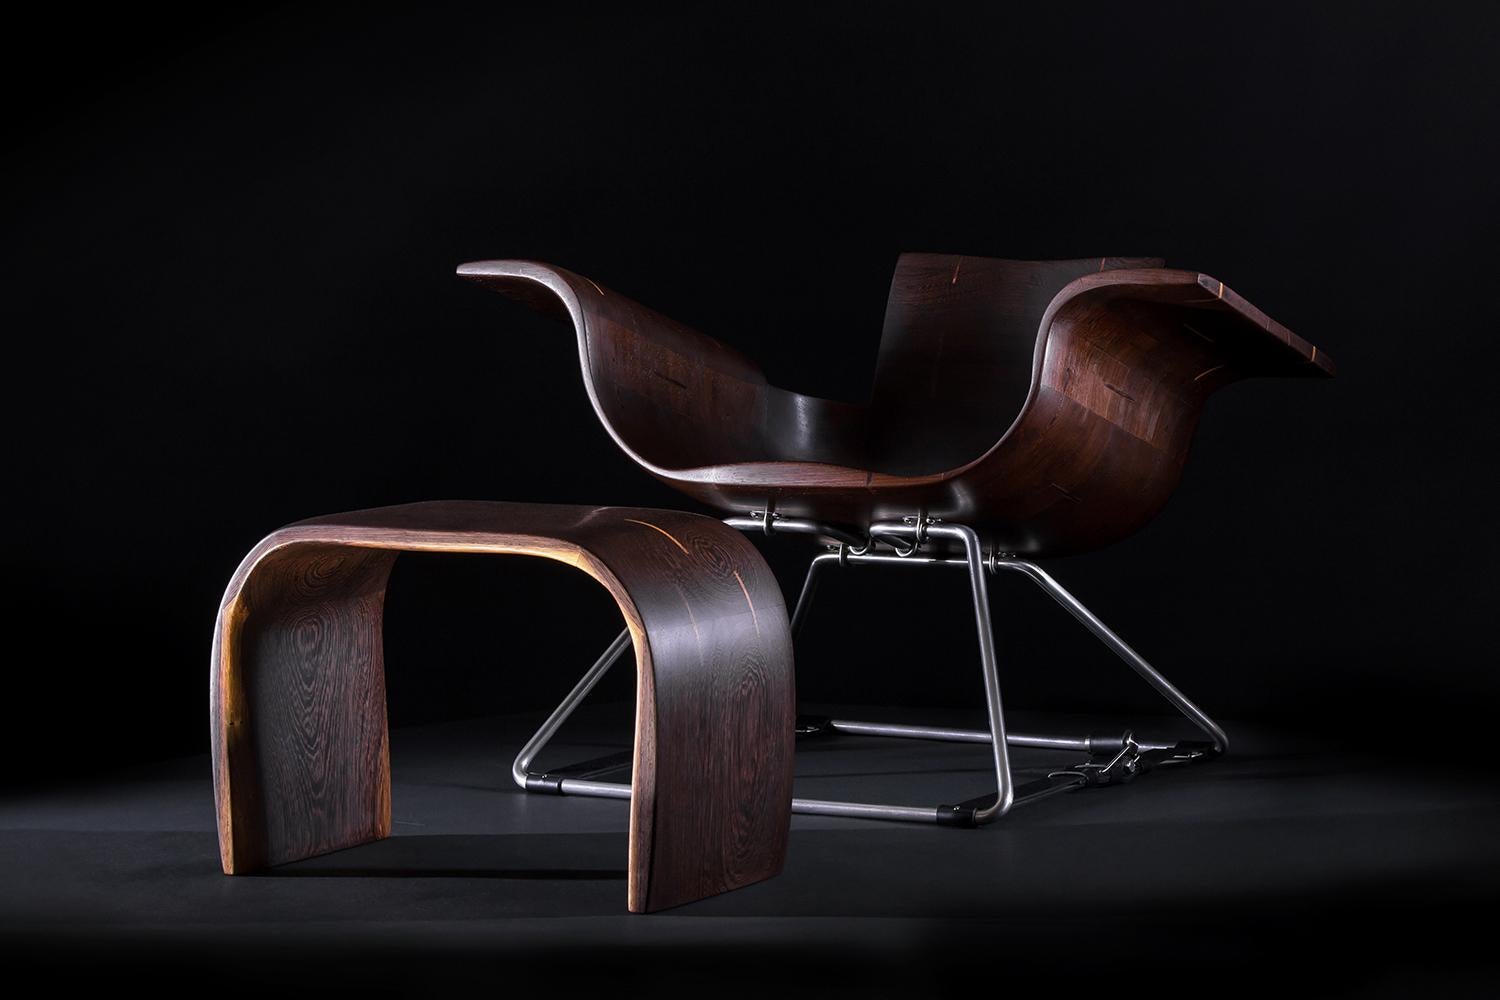 The Roadster armchair and footstool represent a stunning fusion of modern design and homage to the past. Crafted from solid wenge wood, vegetable-tanned leather, and stainless steel. The artist's inspirations are evident in the sleek lines